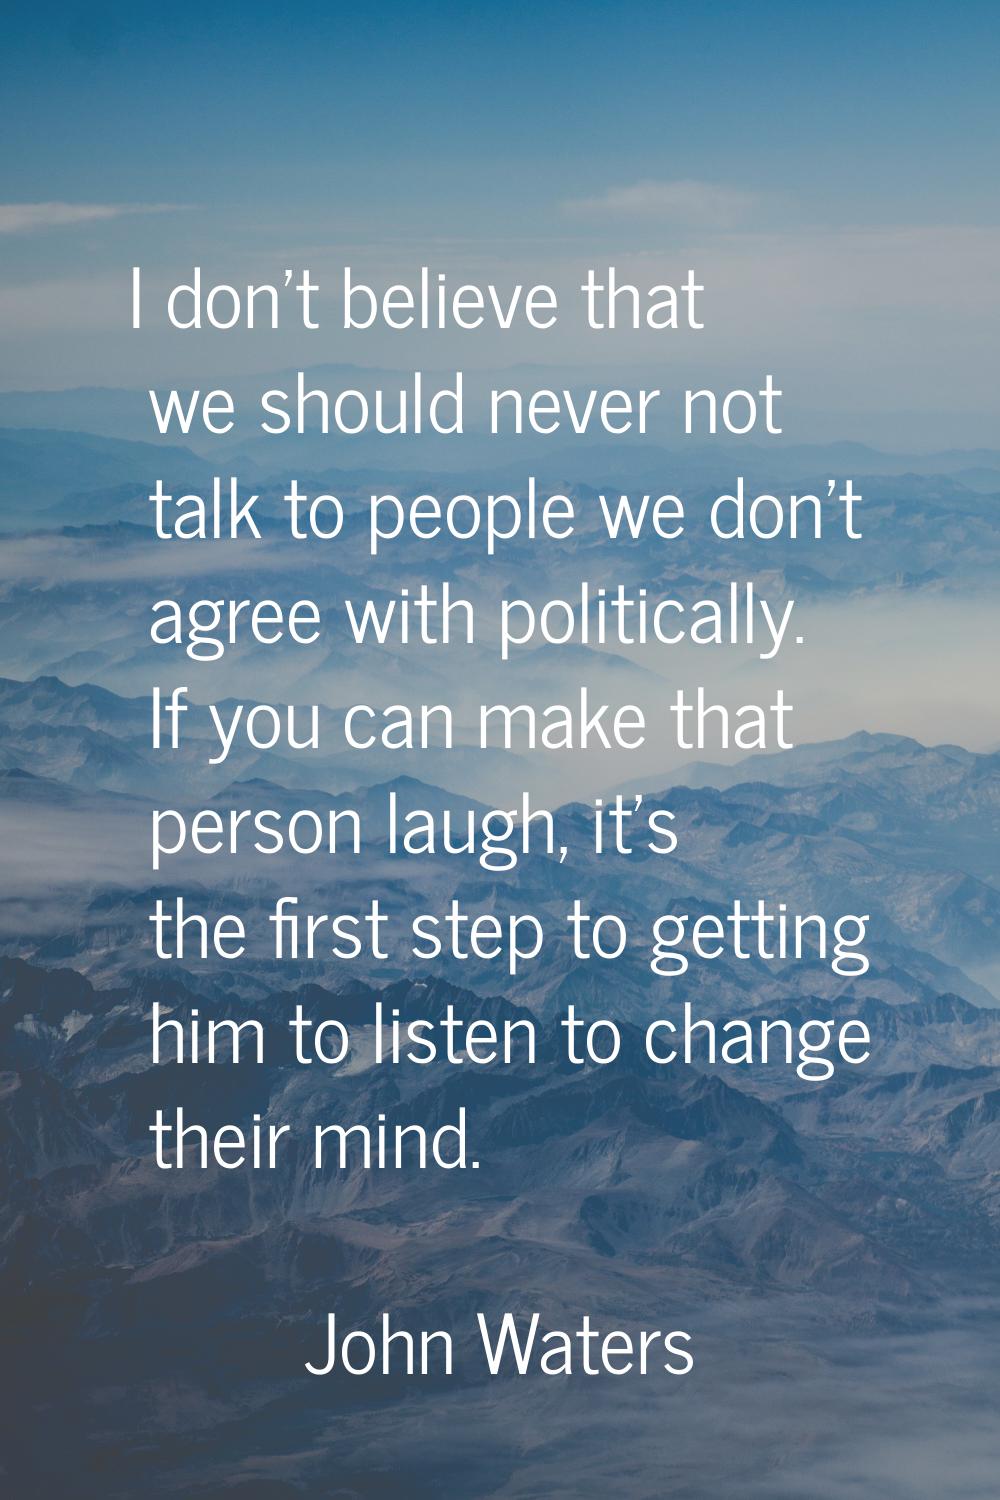 I don't believe that we should never not talk to people we don't agree with politically. If you can